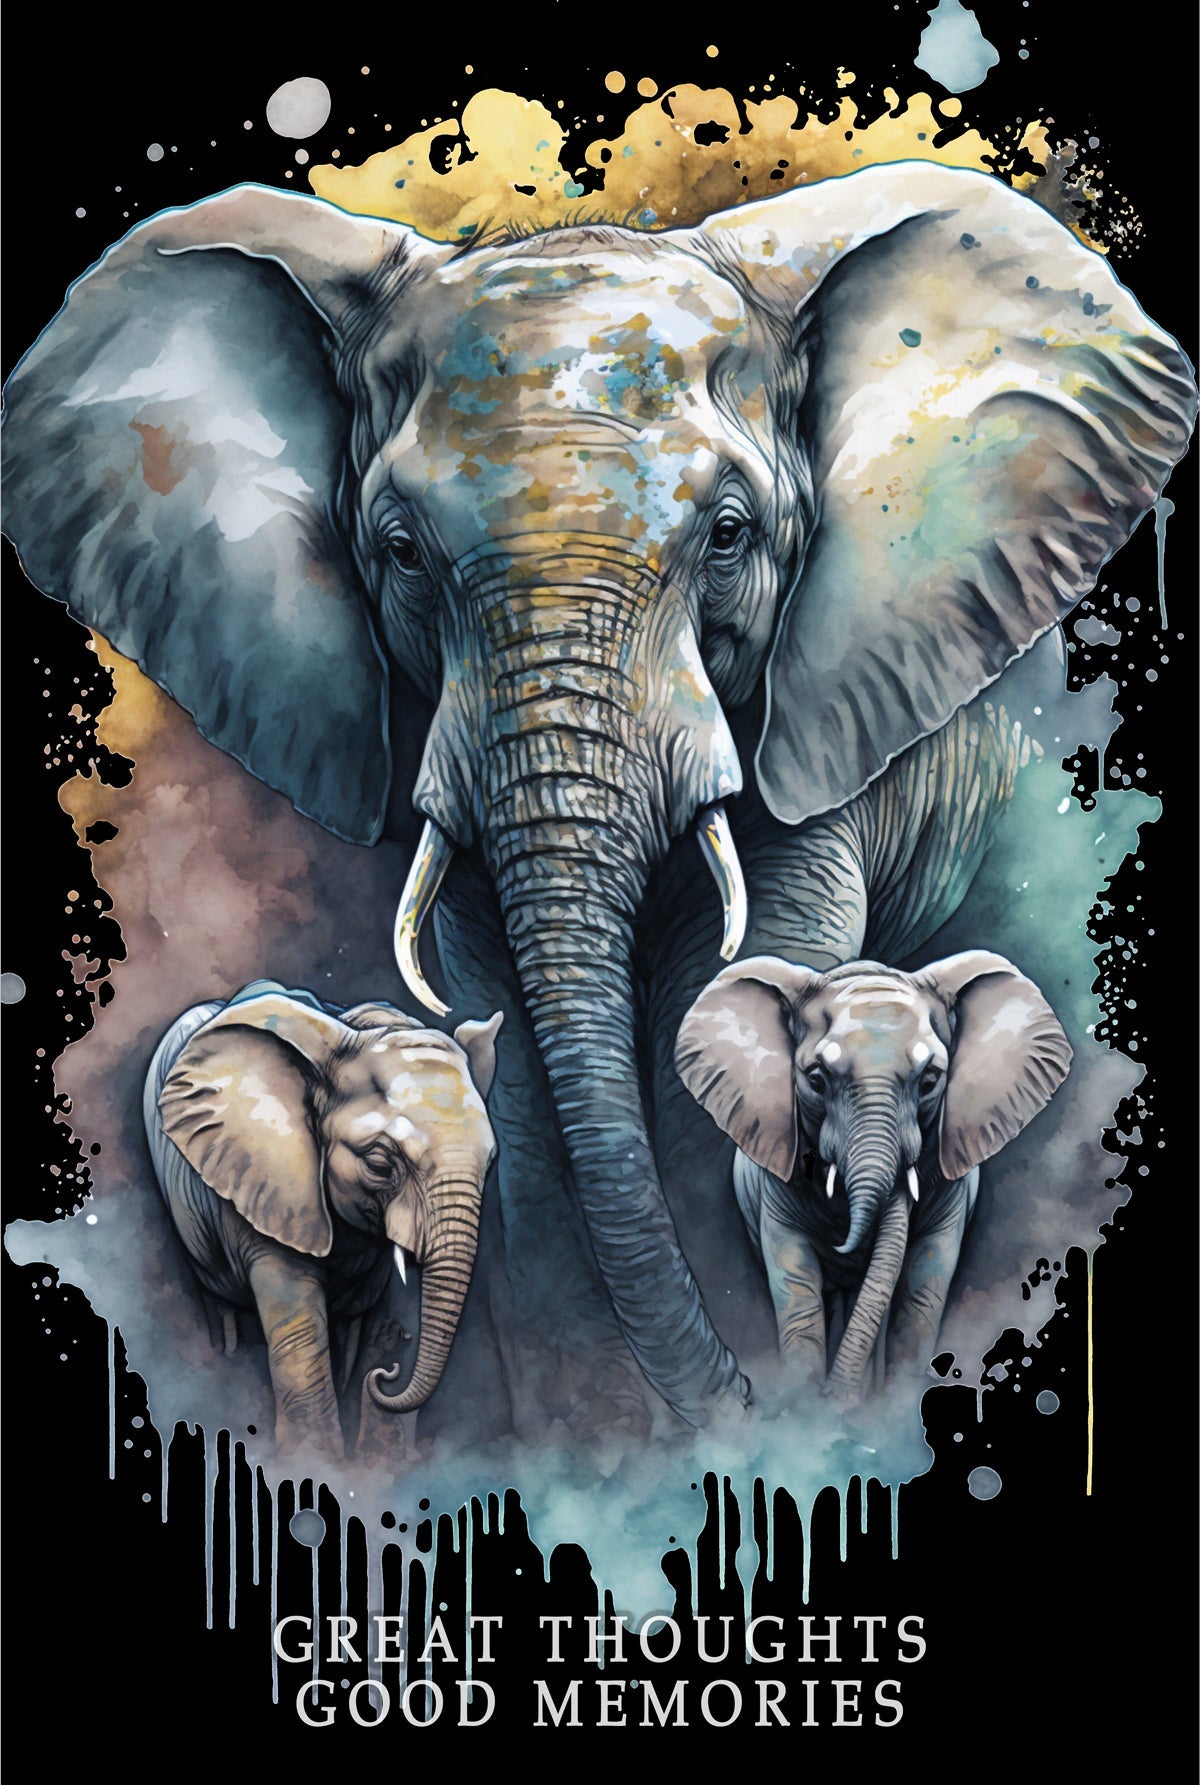 Elephant Family "Great Thoughts, Good Memories" Hard Backed Journal